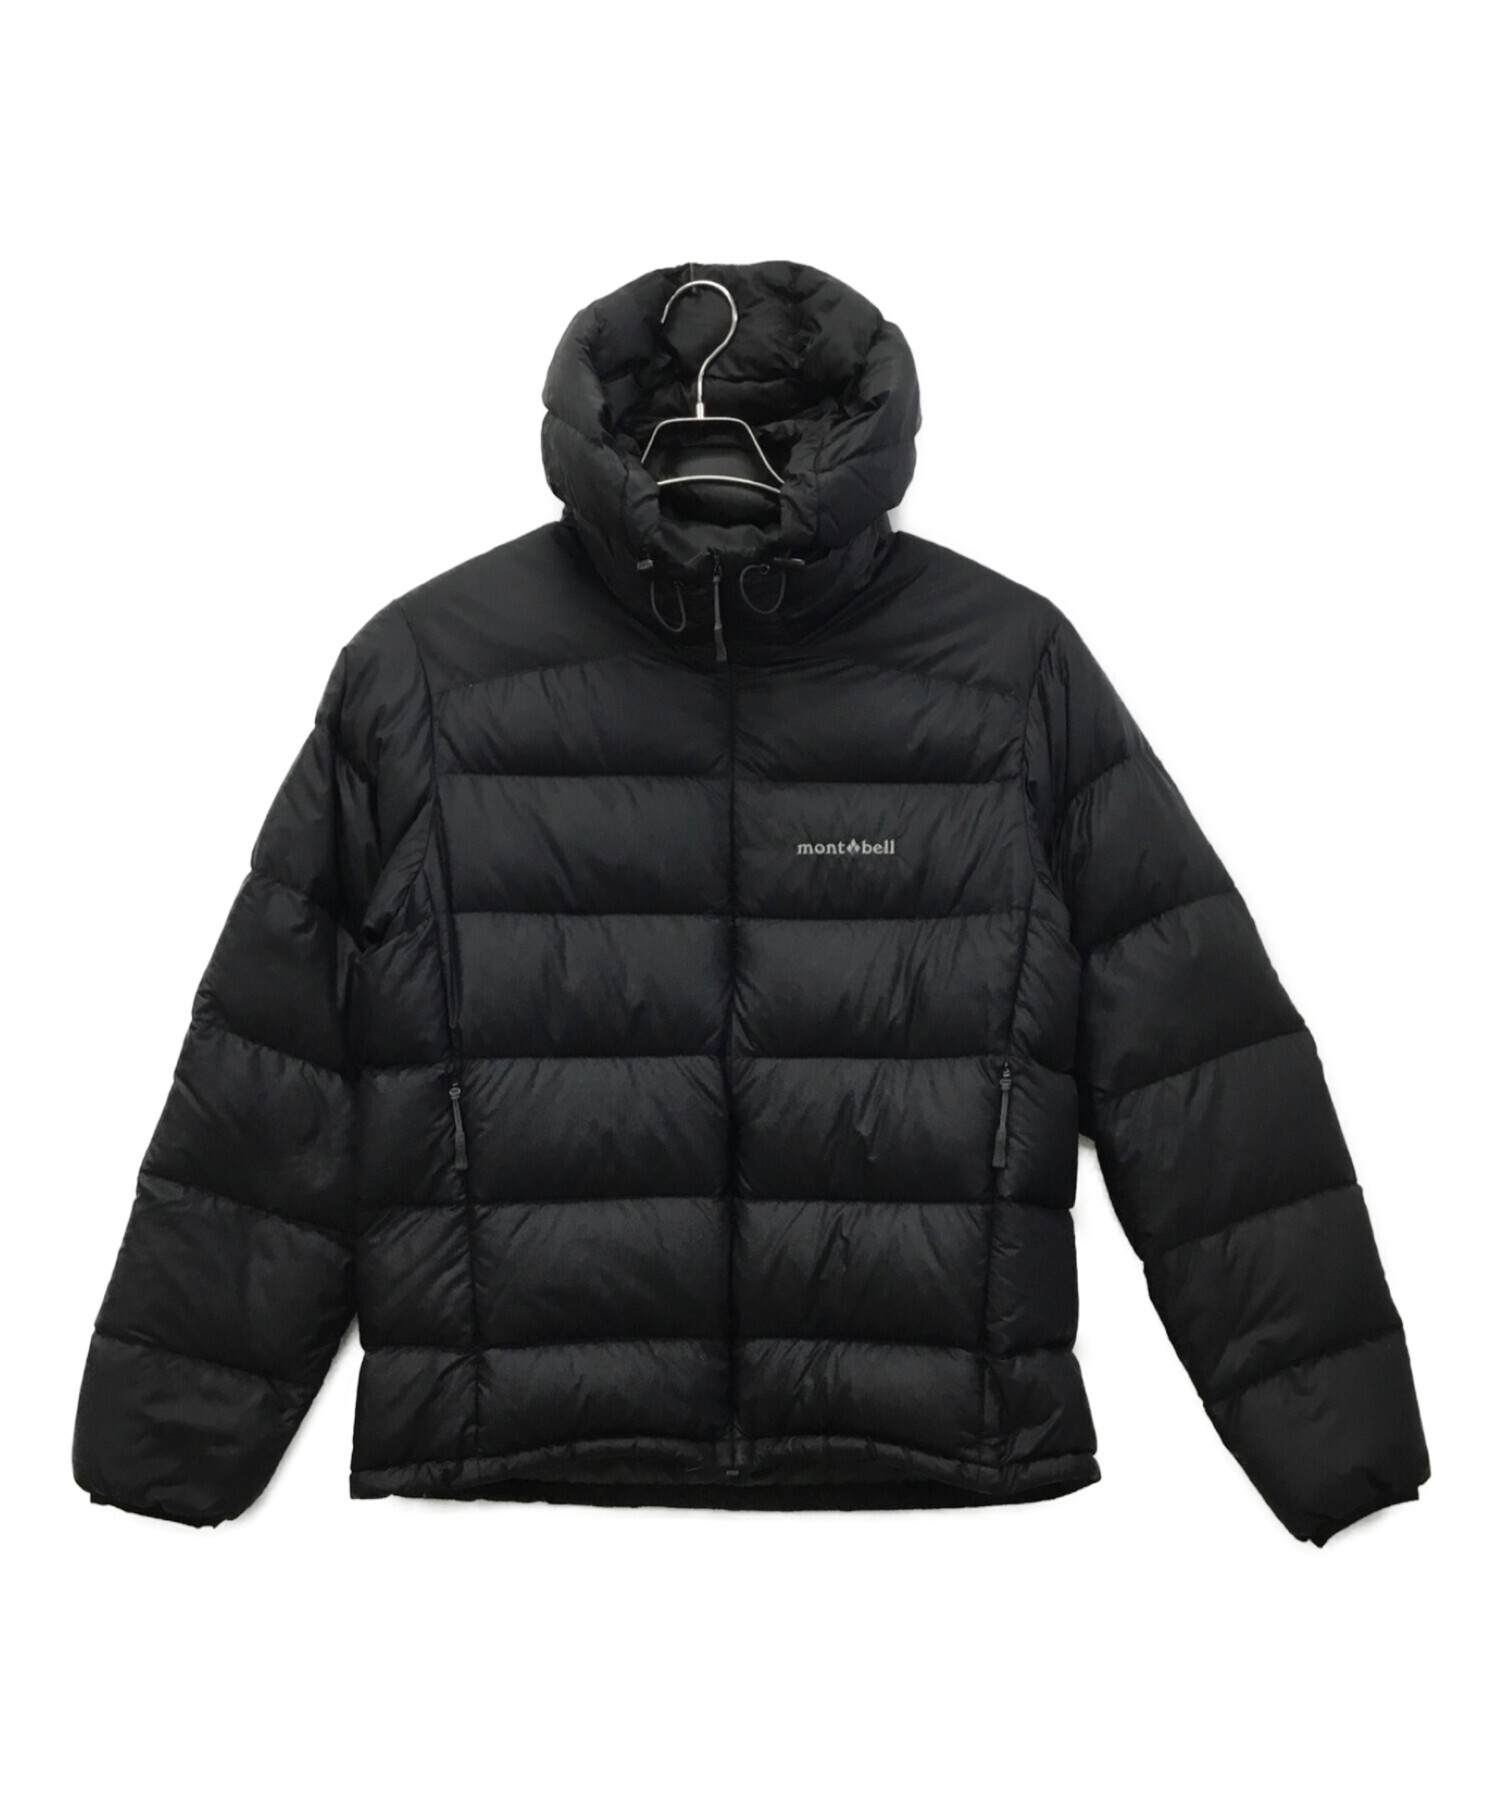 Montbell pufferJacket y2k アルパインダウンパーカ - beaconparenting.ie